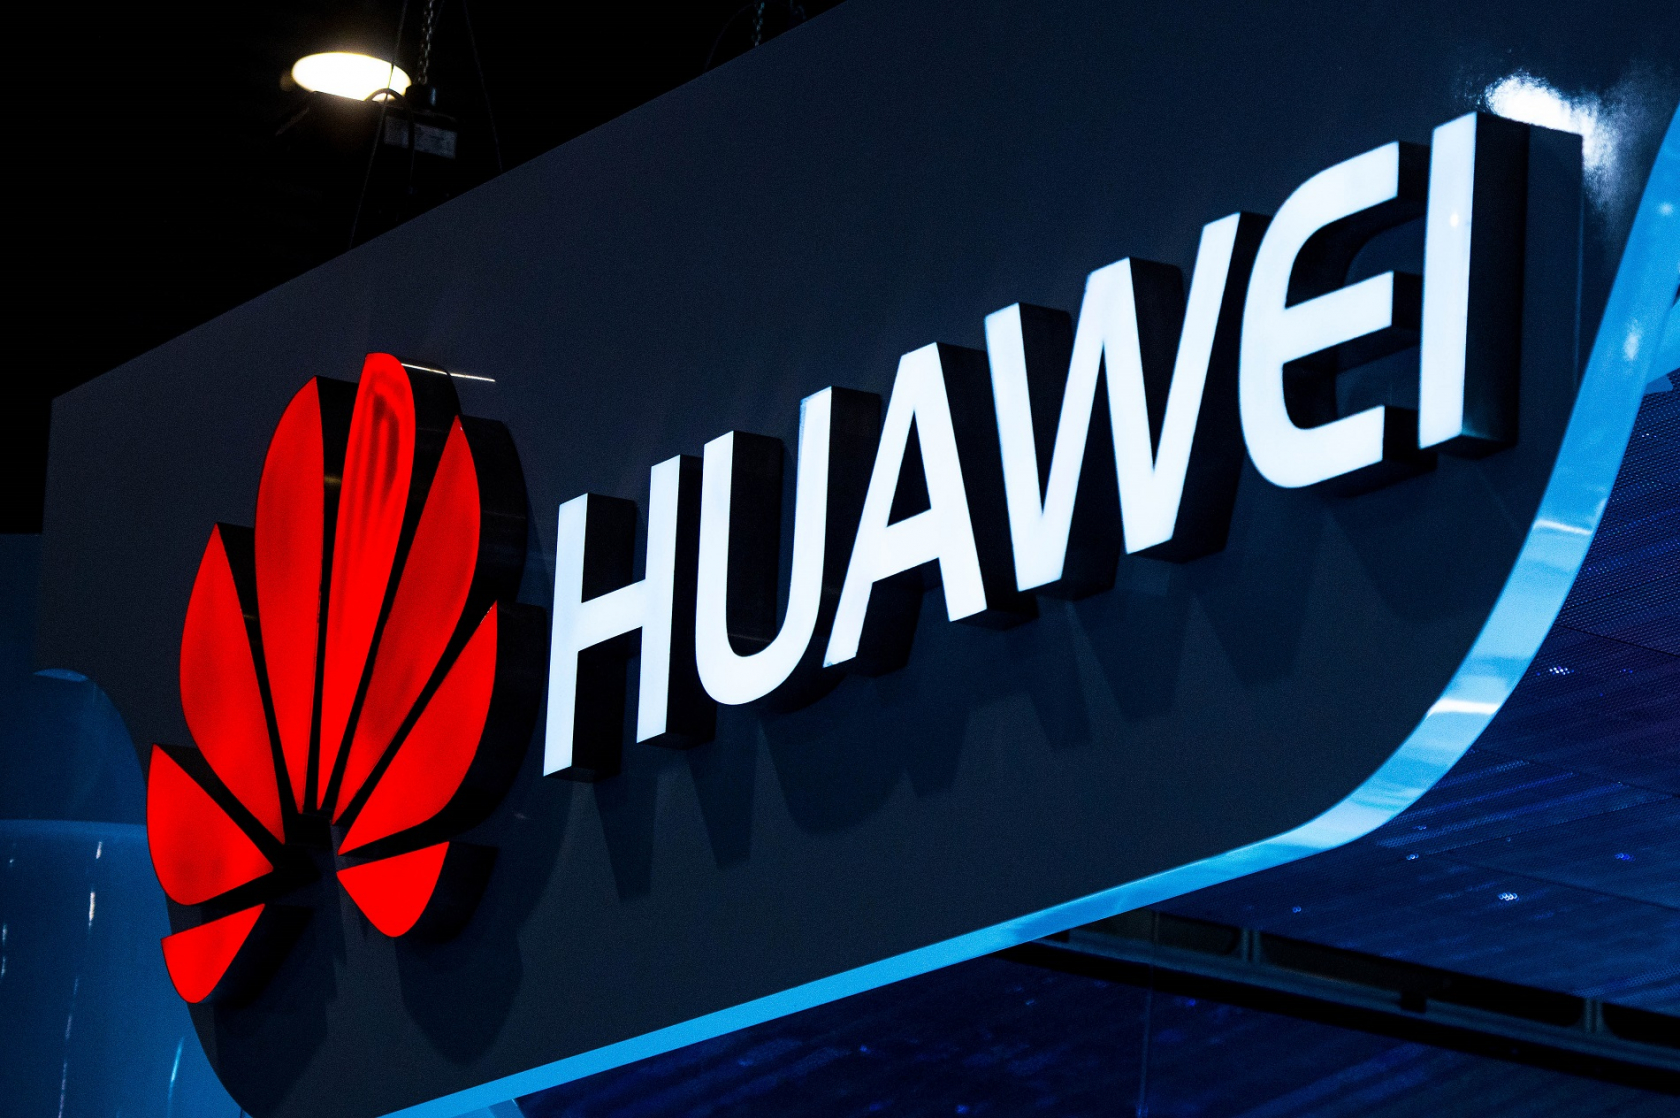 Huawei shipped over 200 million smartphones this year, breaking its own record